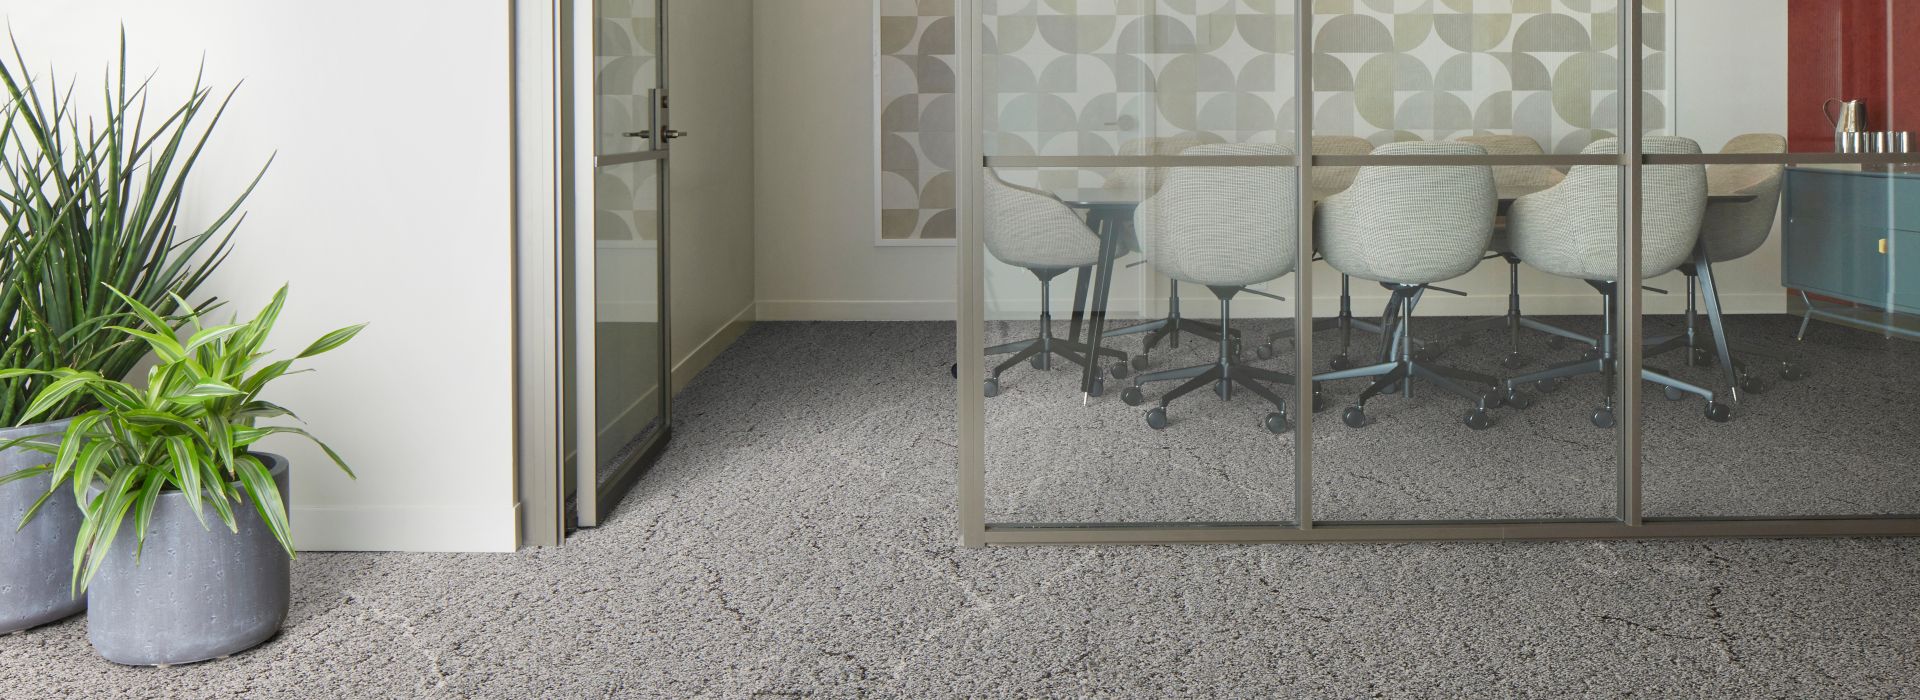 Interface Ribbon Rock carpet tile in small conference room